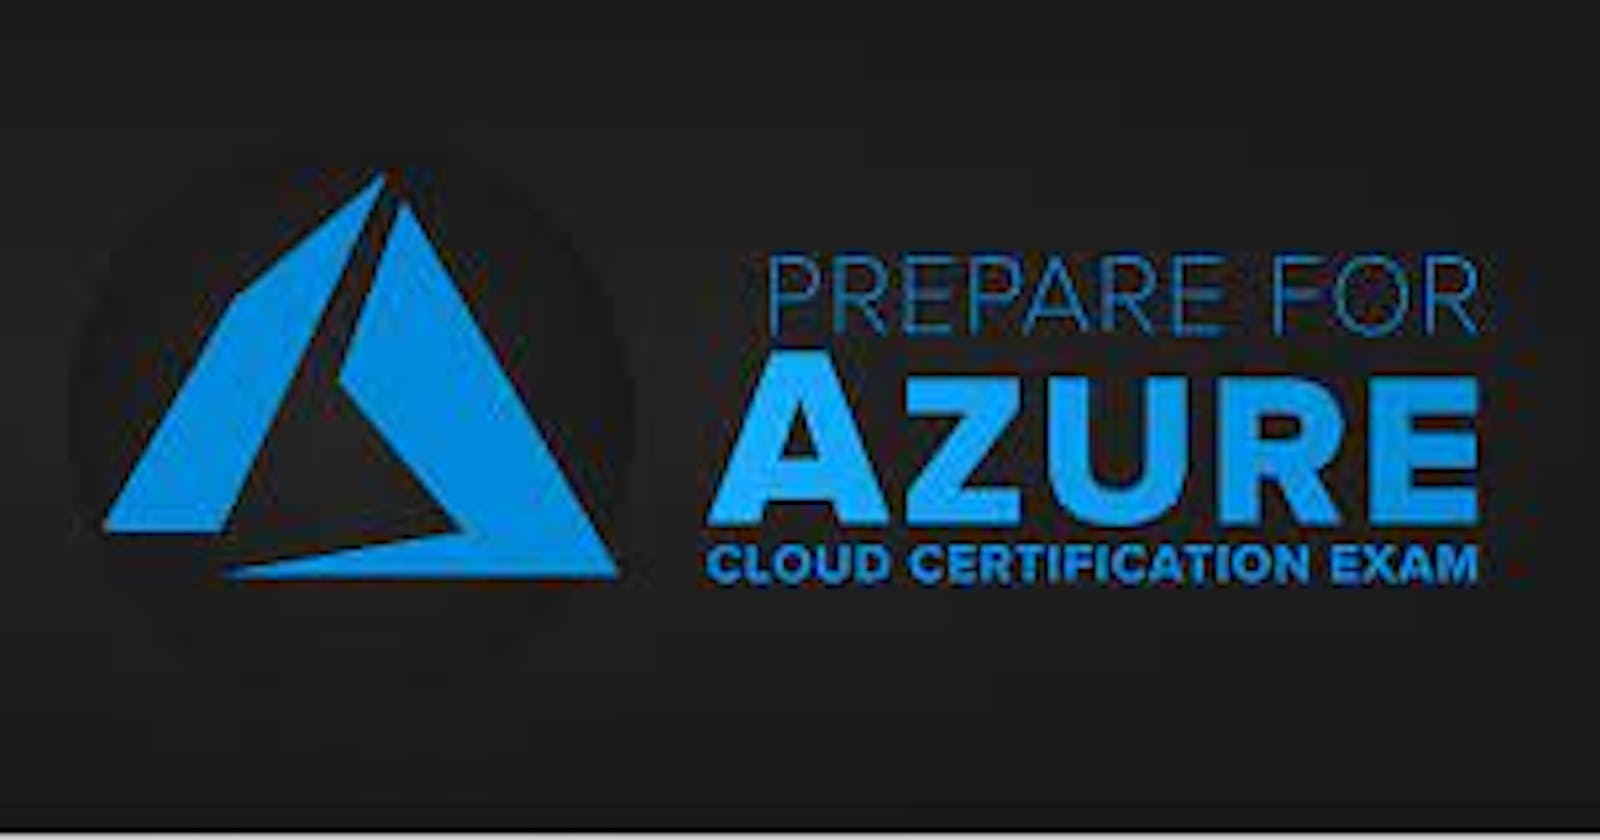 How to prepare for Azure certification?